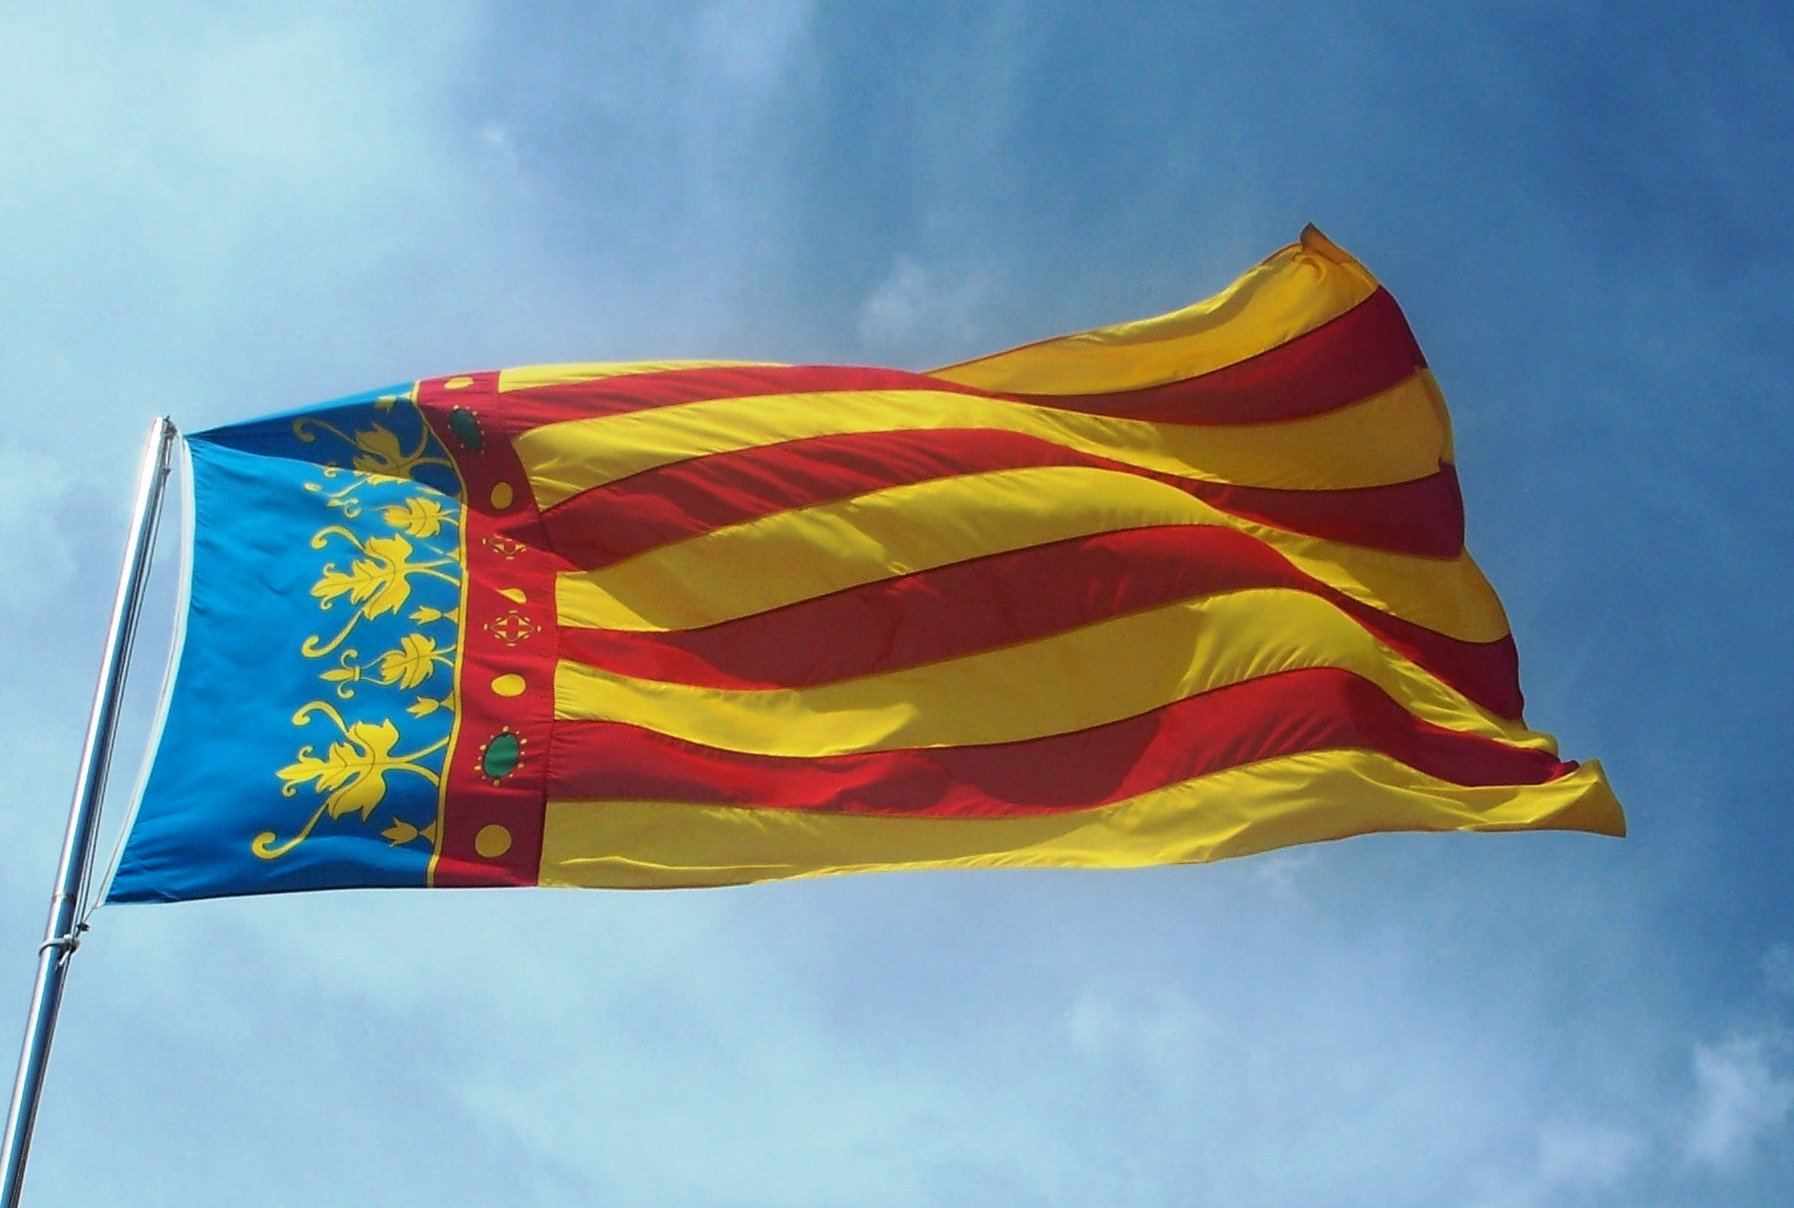 Ignorant Spanish nationalism: Valencians attacked as a Valencian flag is mistaken for a Catalan flag